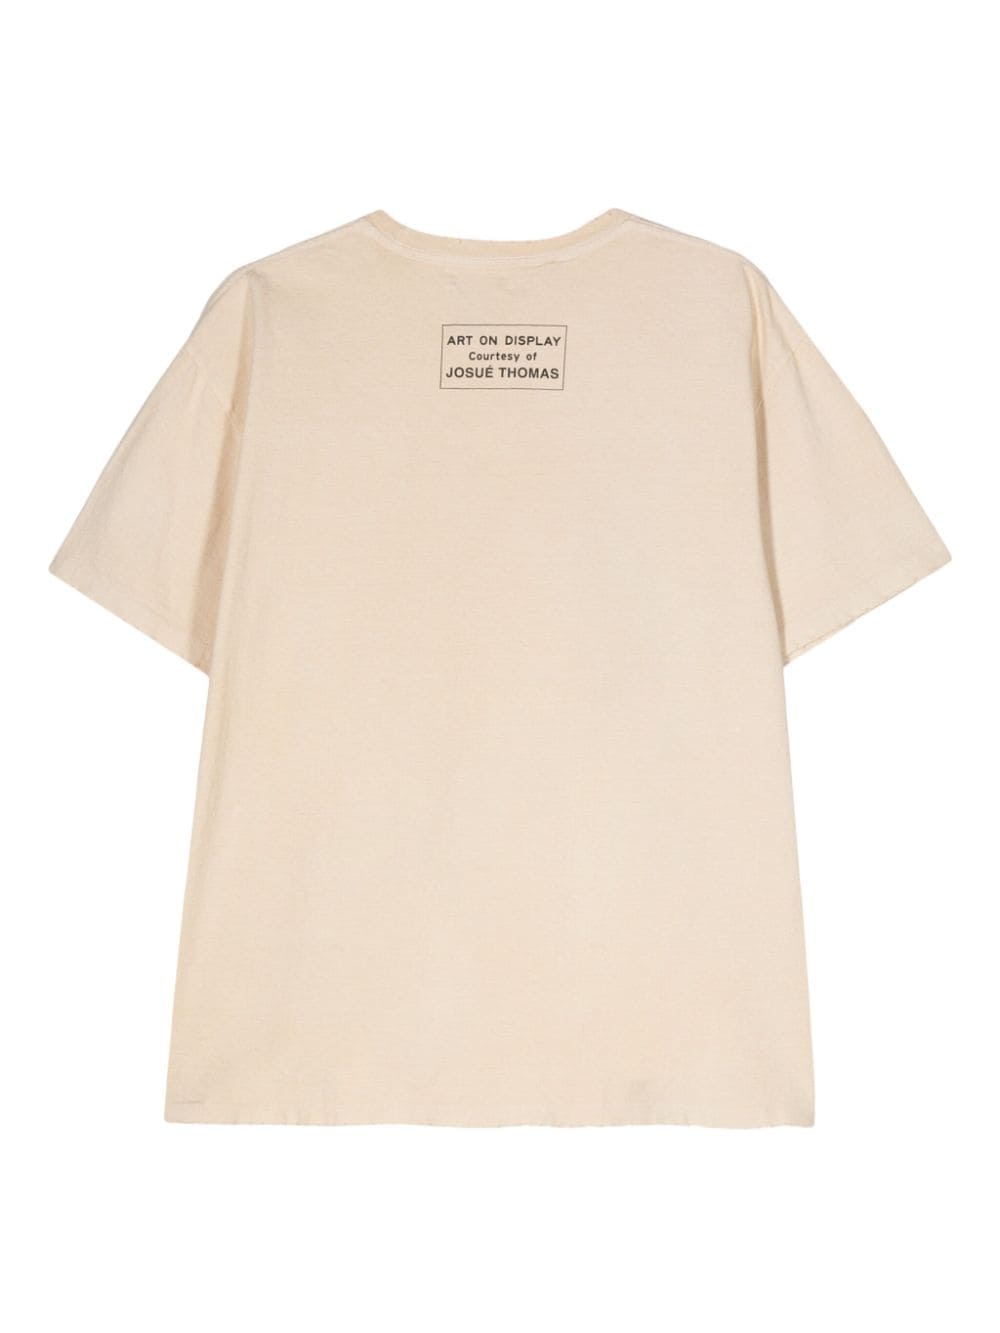 GALLERY DEPT. Yesterday Was Tomorrow T-shirt - Beige